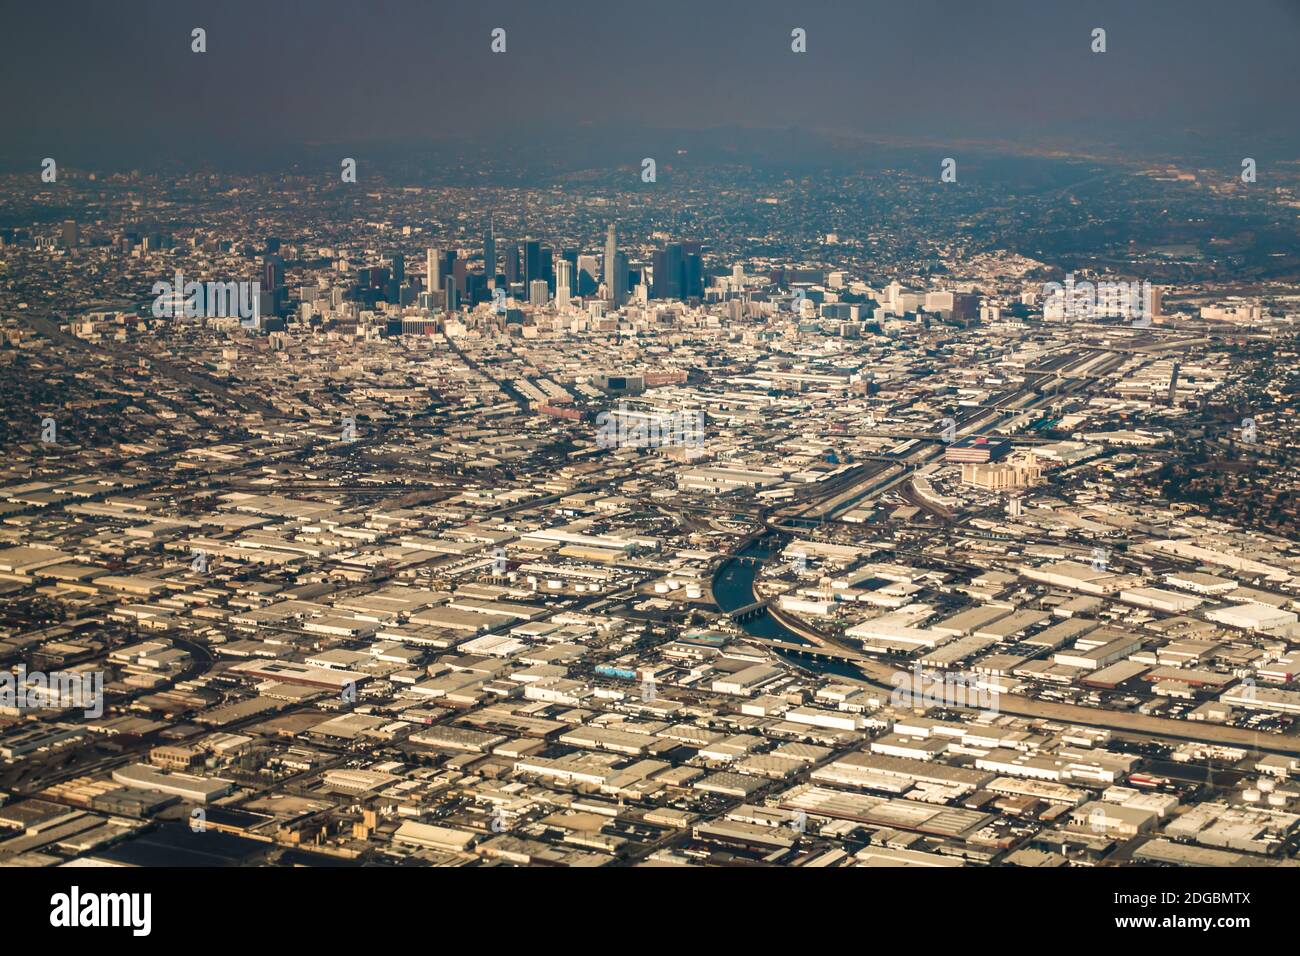 Downtown los angeles skyline and suburbs from airplane and smoke from wild fires Stock Photo